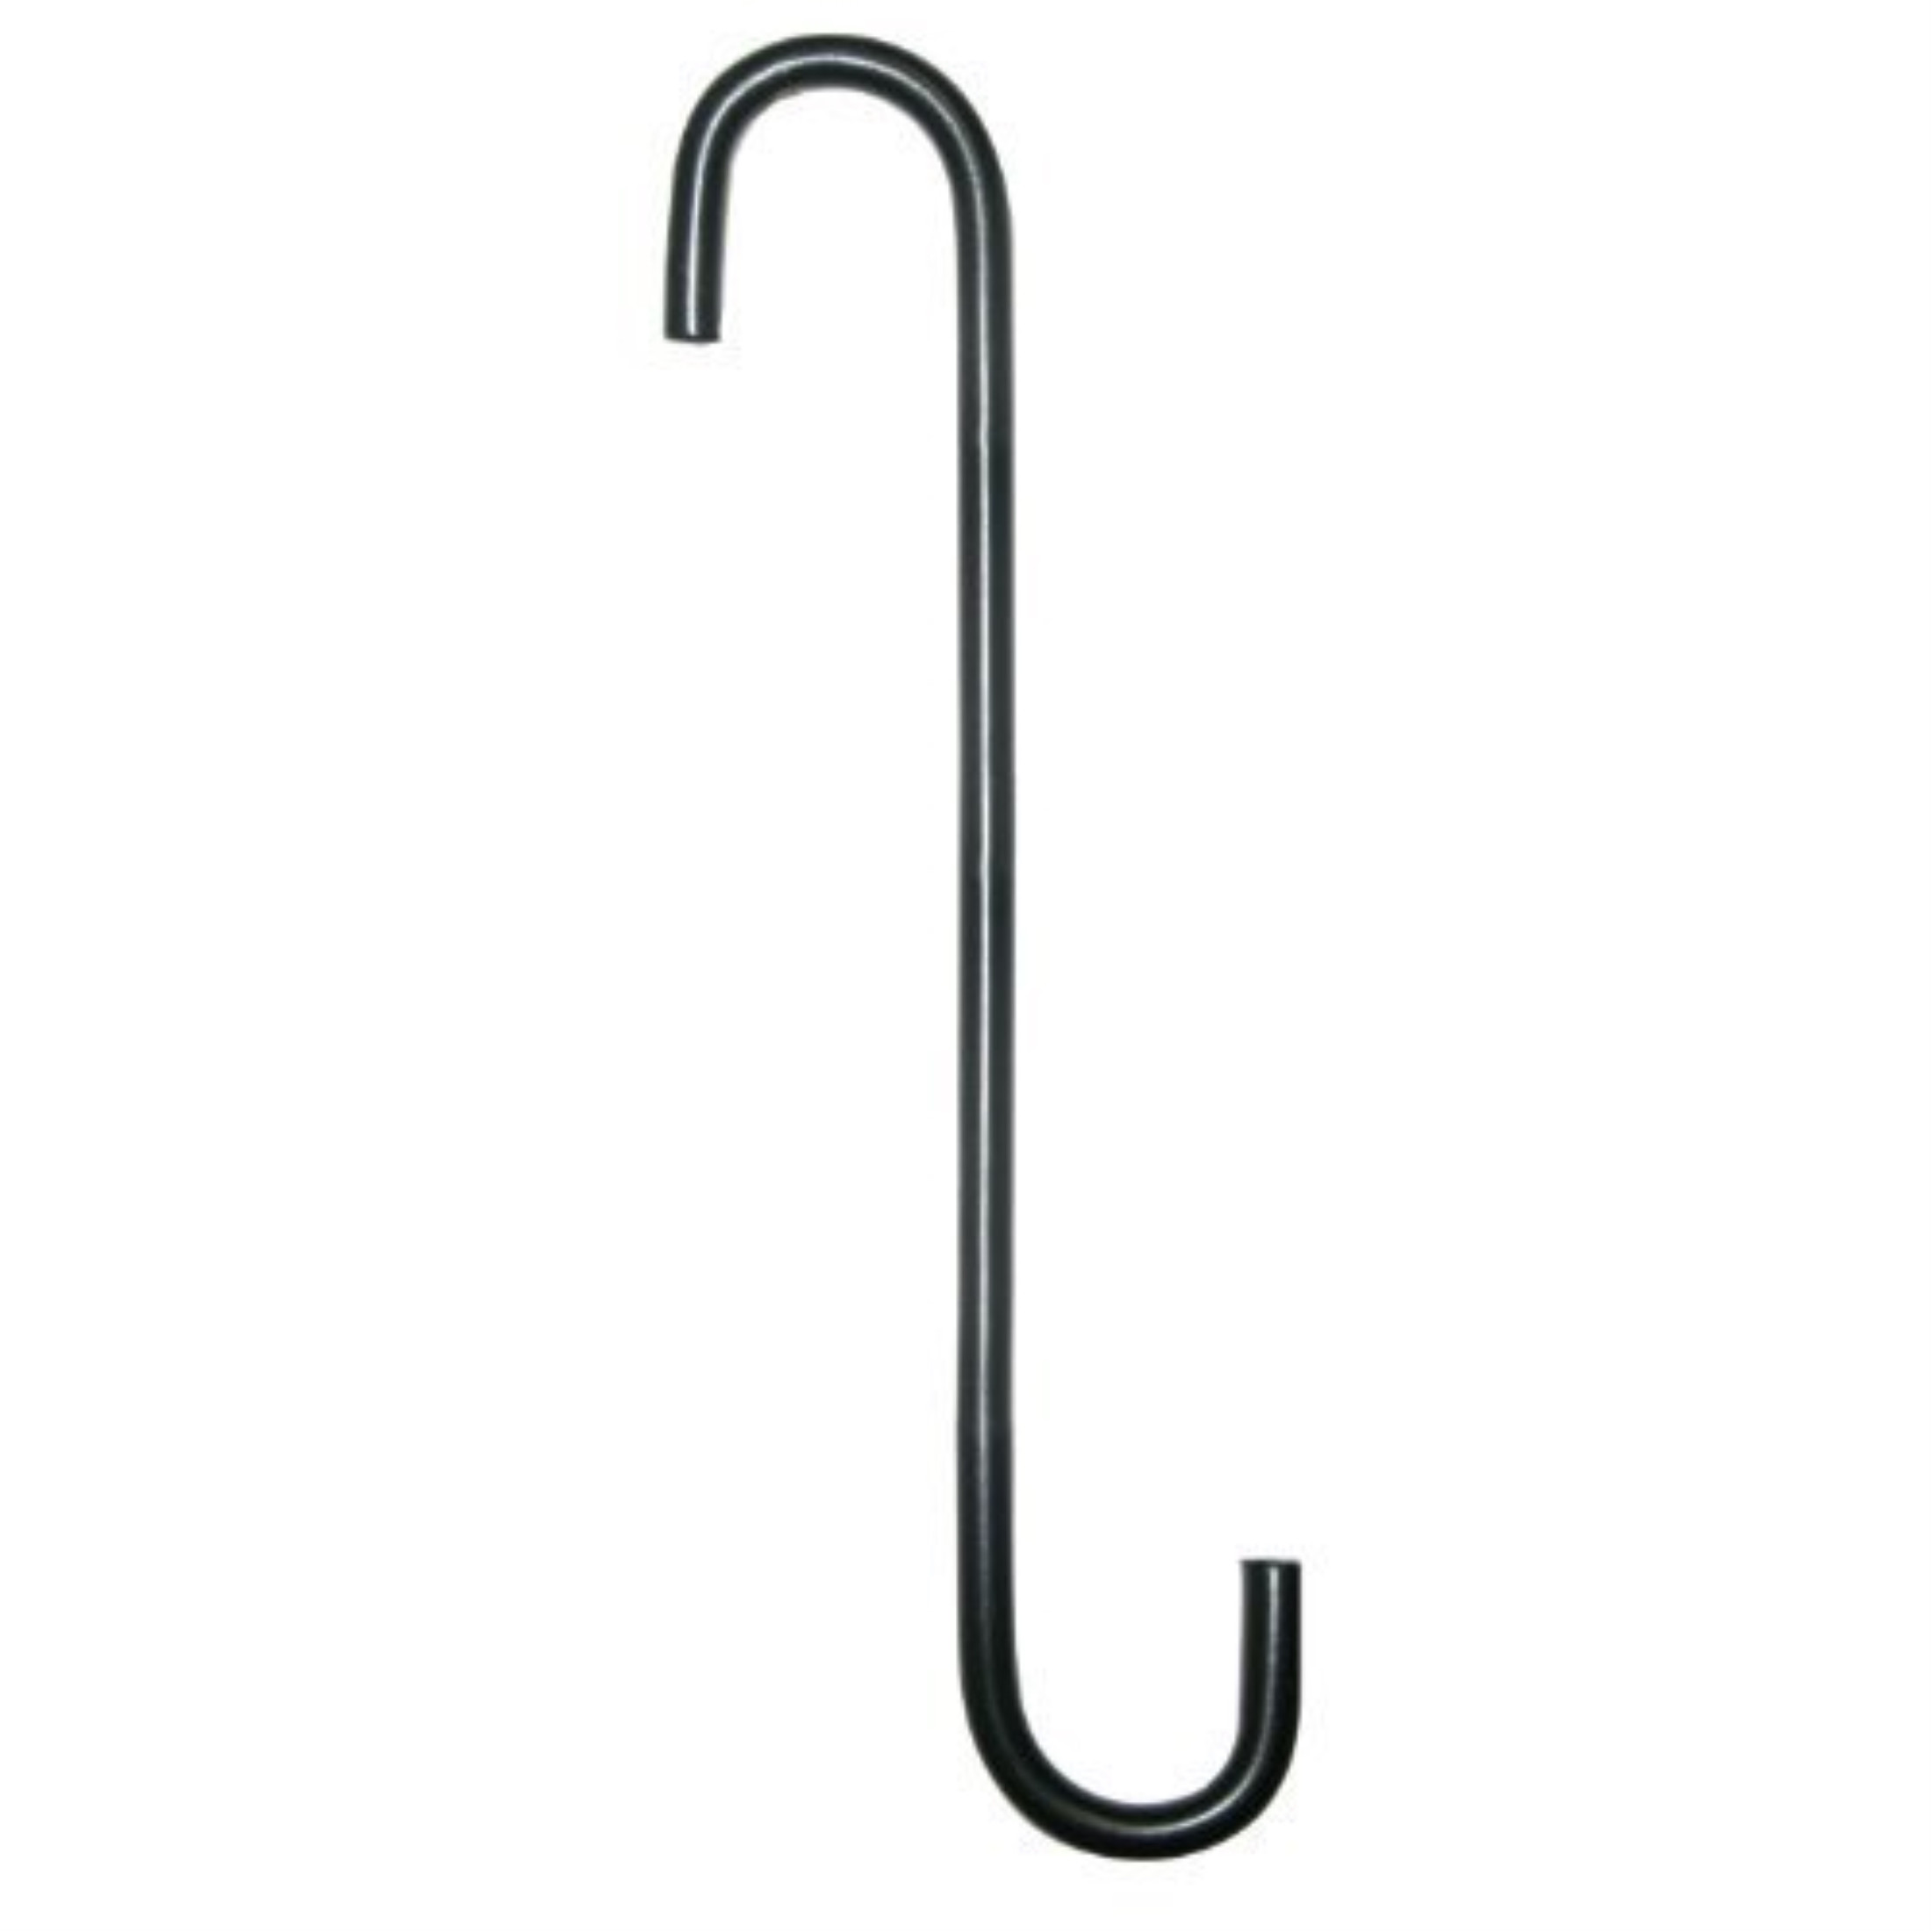 Hookery (#RS8) Metal S Extension Hook, Black 8" with 1" Opening (Pack of 1)